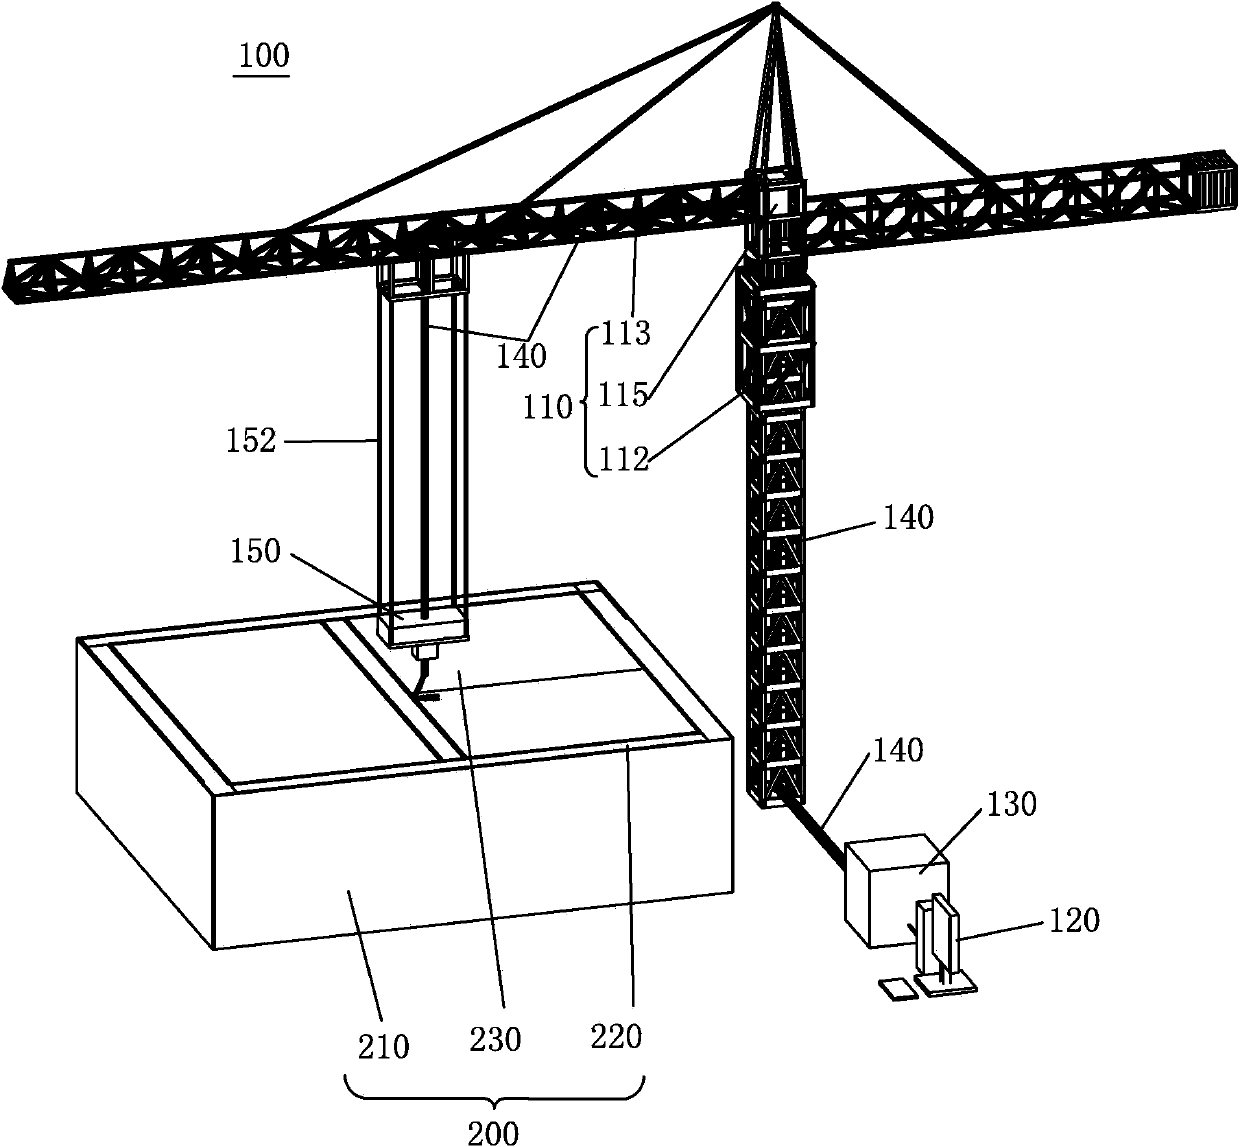 Construction equipment and construction method for constructional engineering